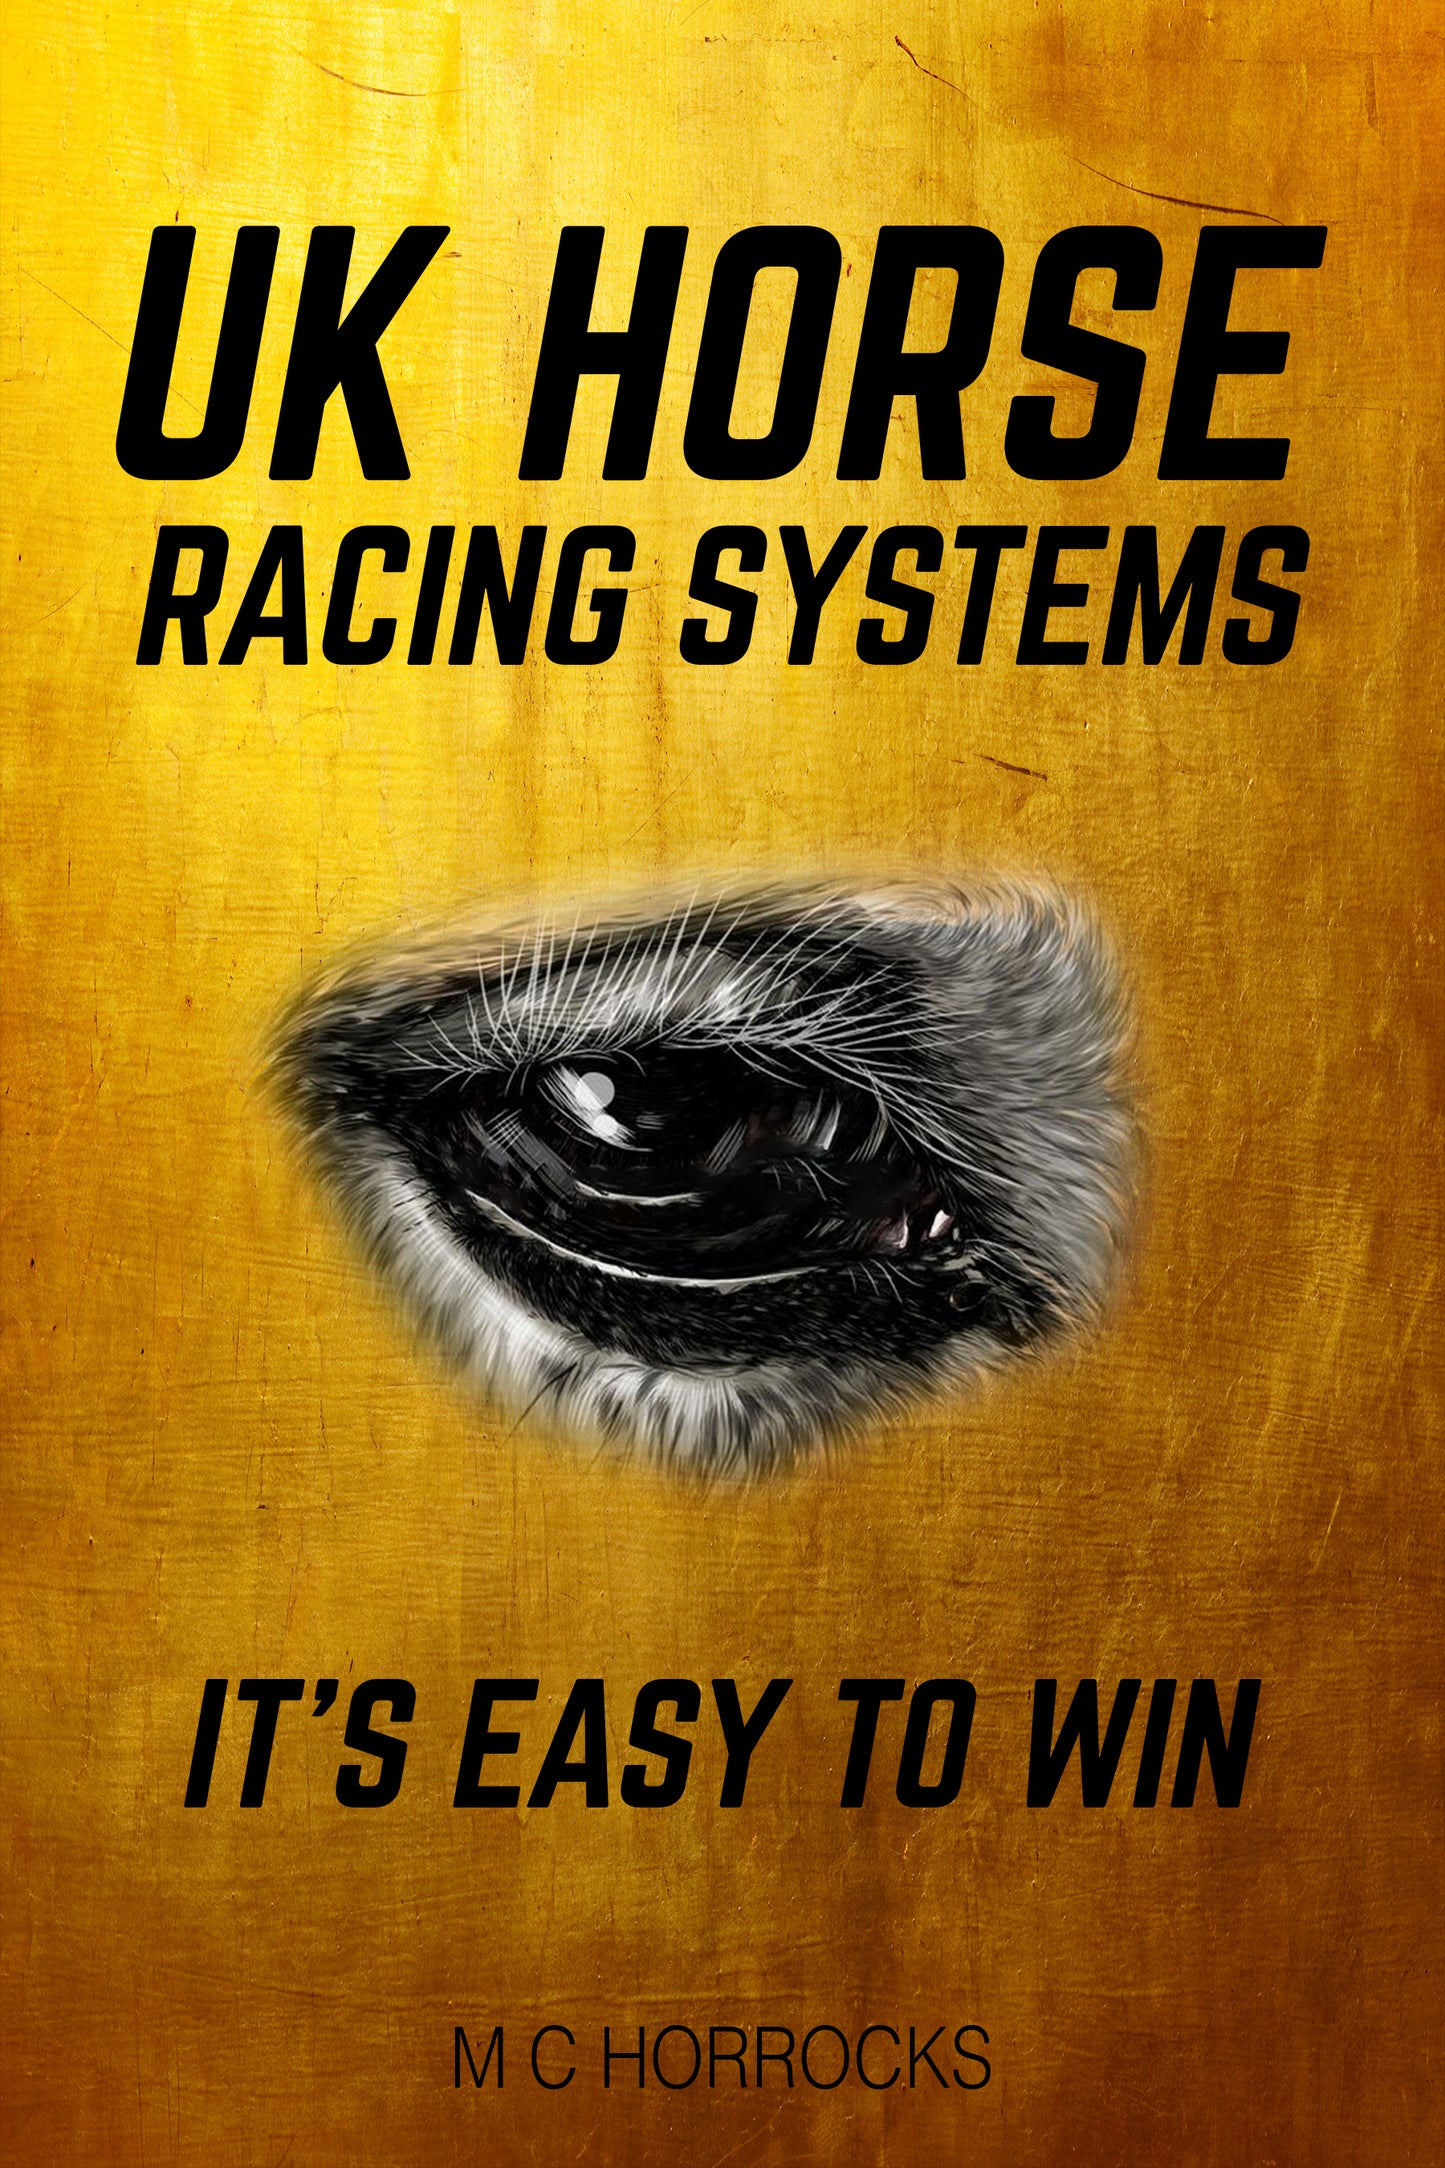 UK Horse Racing Systems - It's Easy To Win Paperback Book